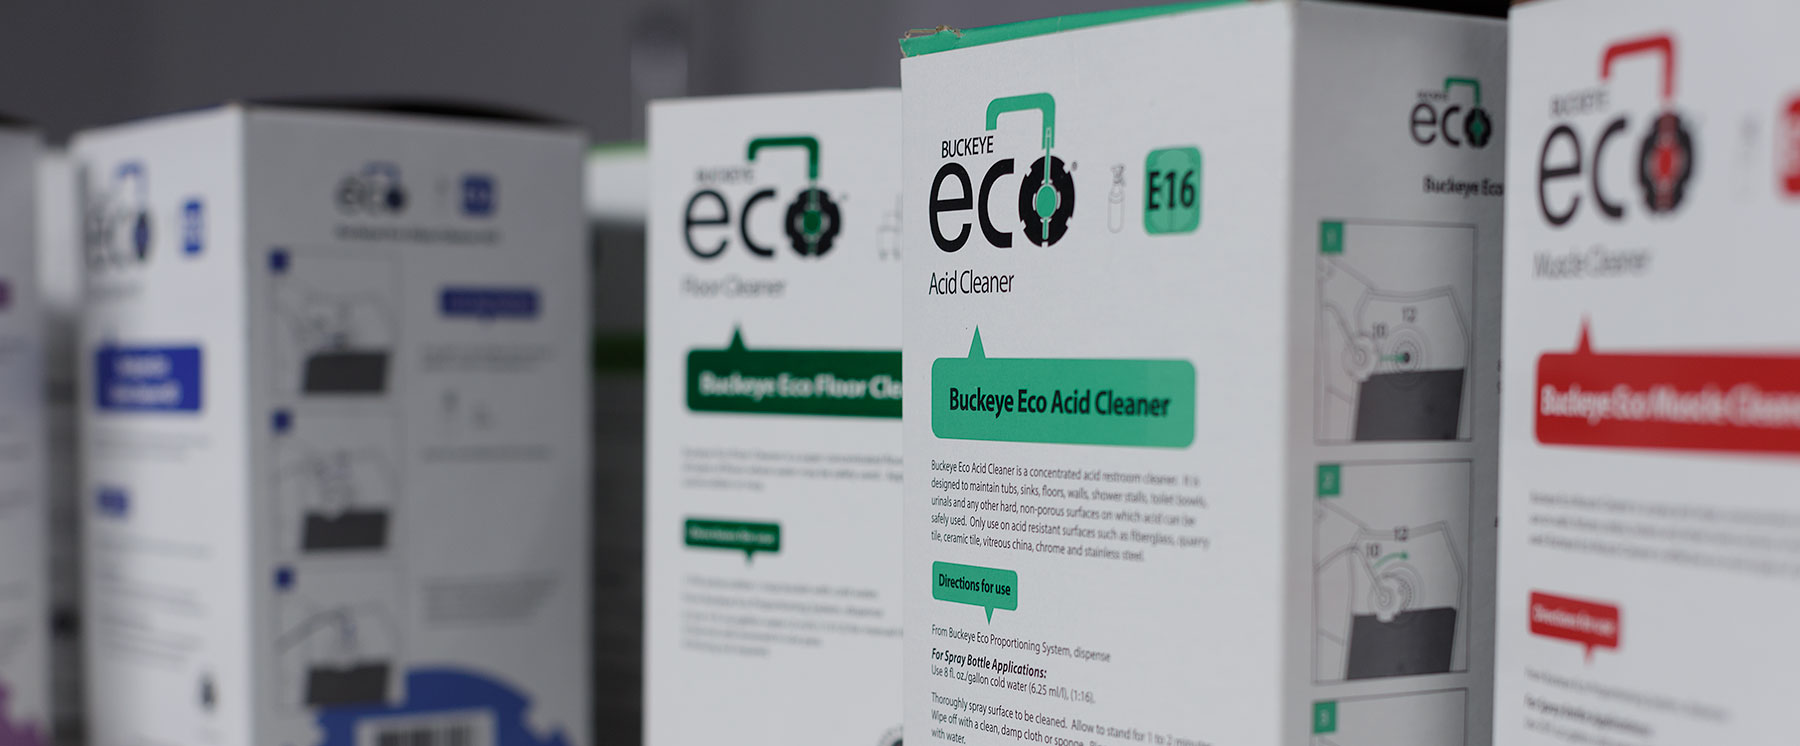 A picture of various Buckeye Eco products